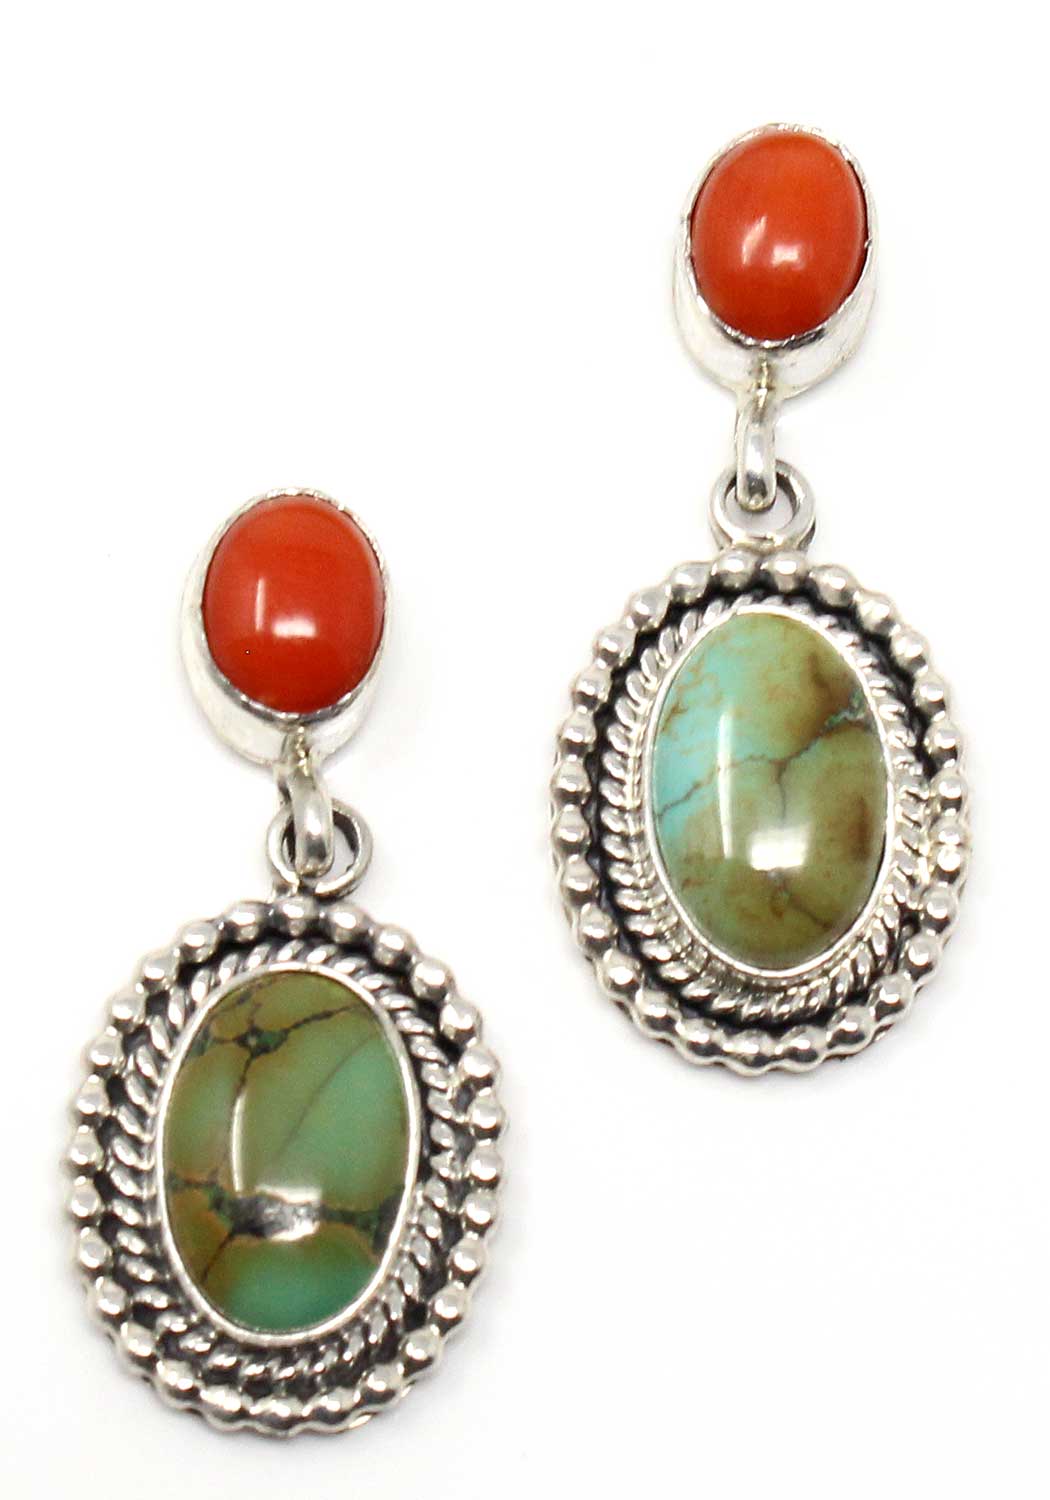 Turquoise & Coral Dangle Earrings by Larry